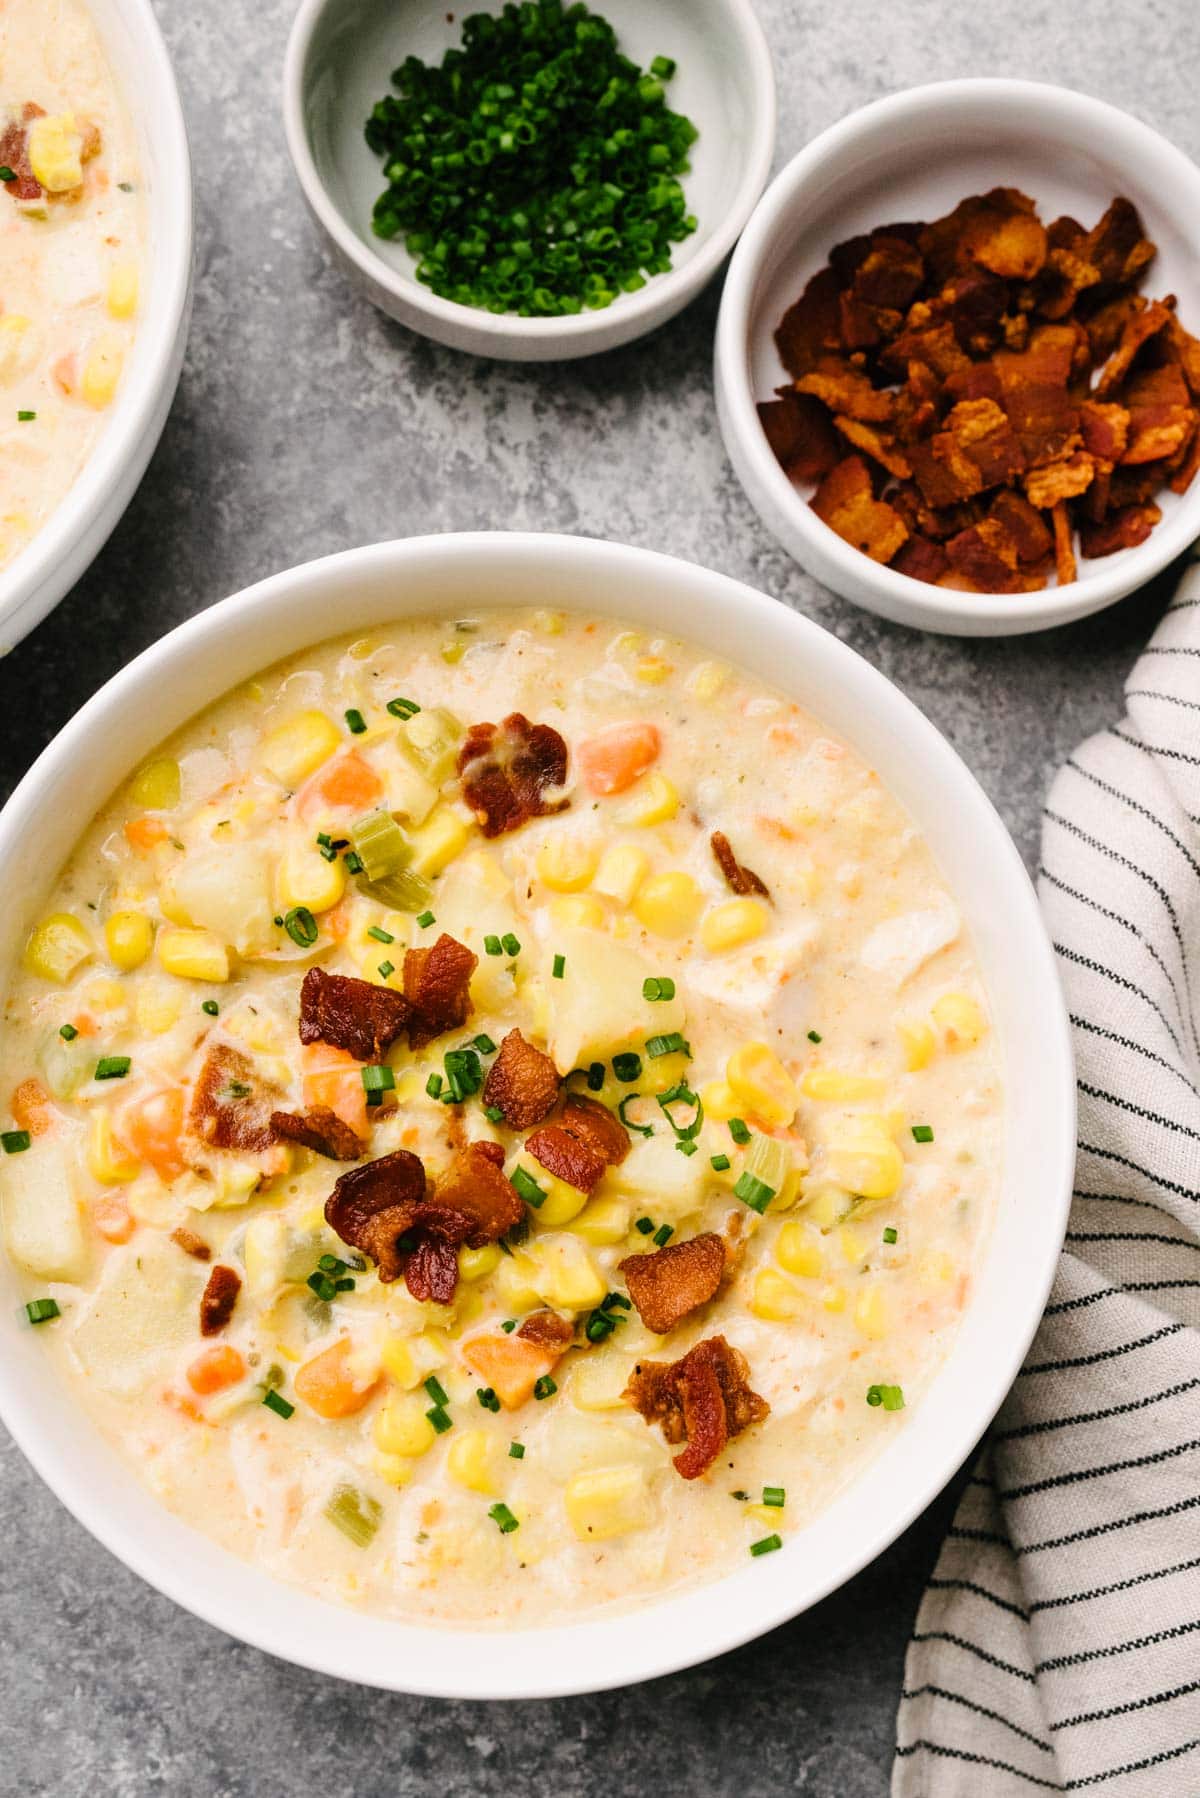 A bowl of turkey corn chowder garnished with bacon and chives on a concrete background; the bowl is surrounded by small bowls of cooked bacon and fresh chives, as well as a striped linen napkin.